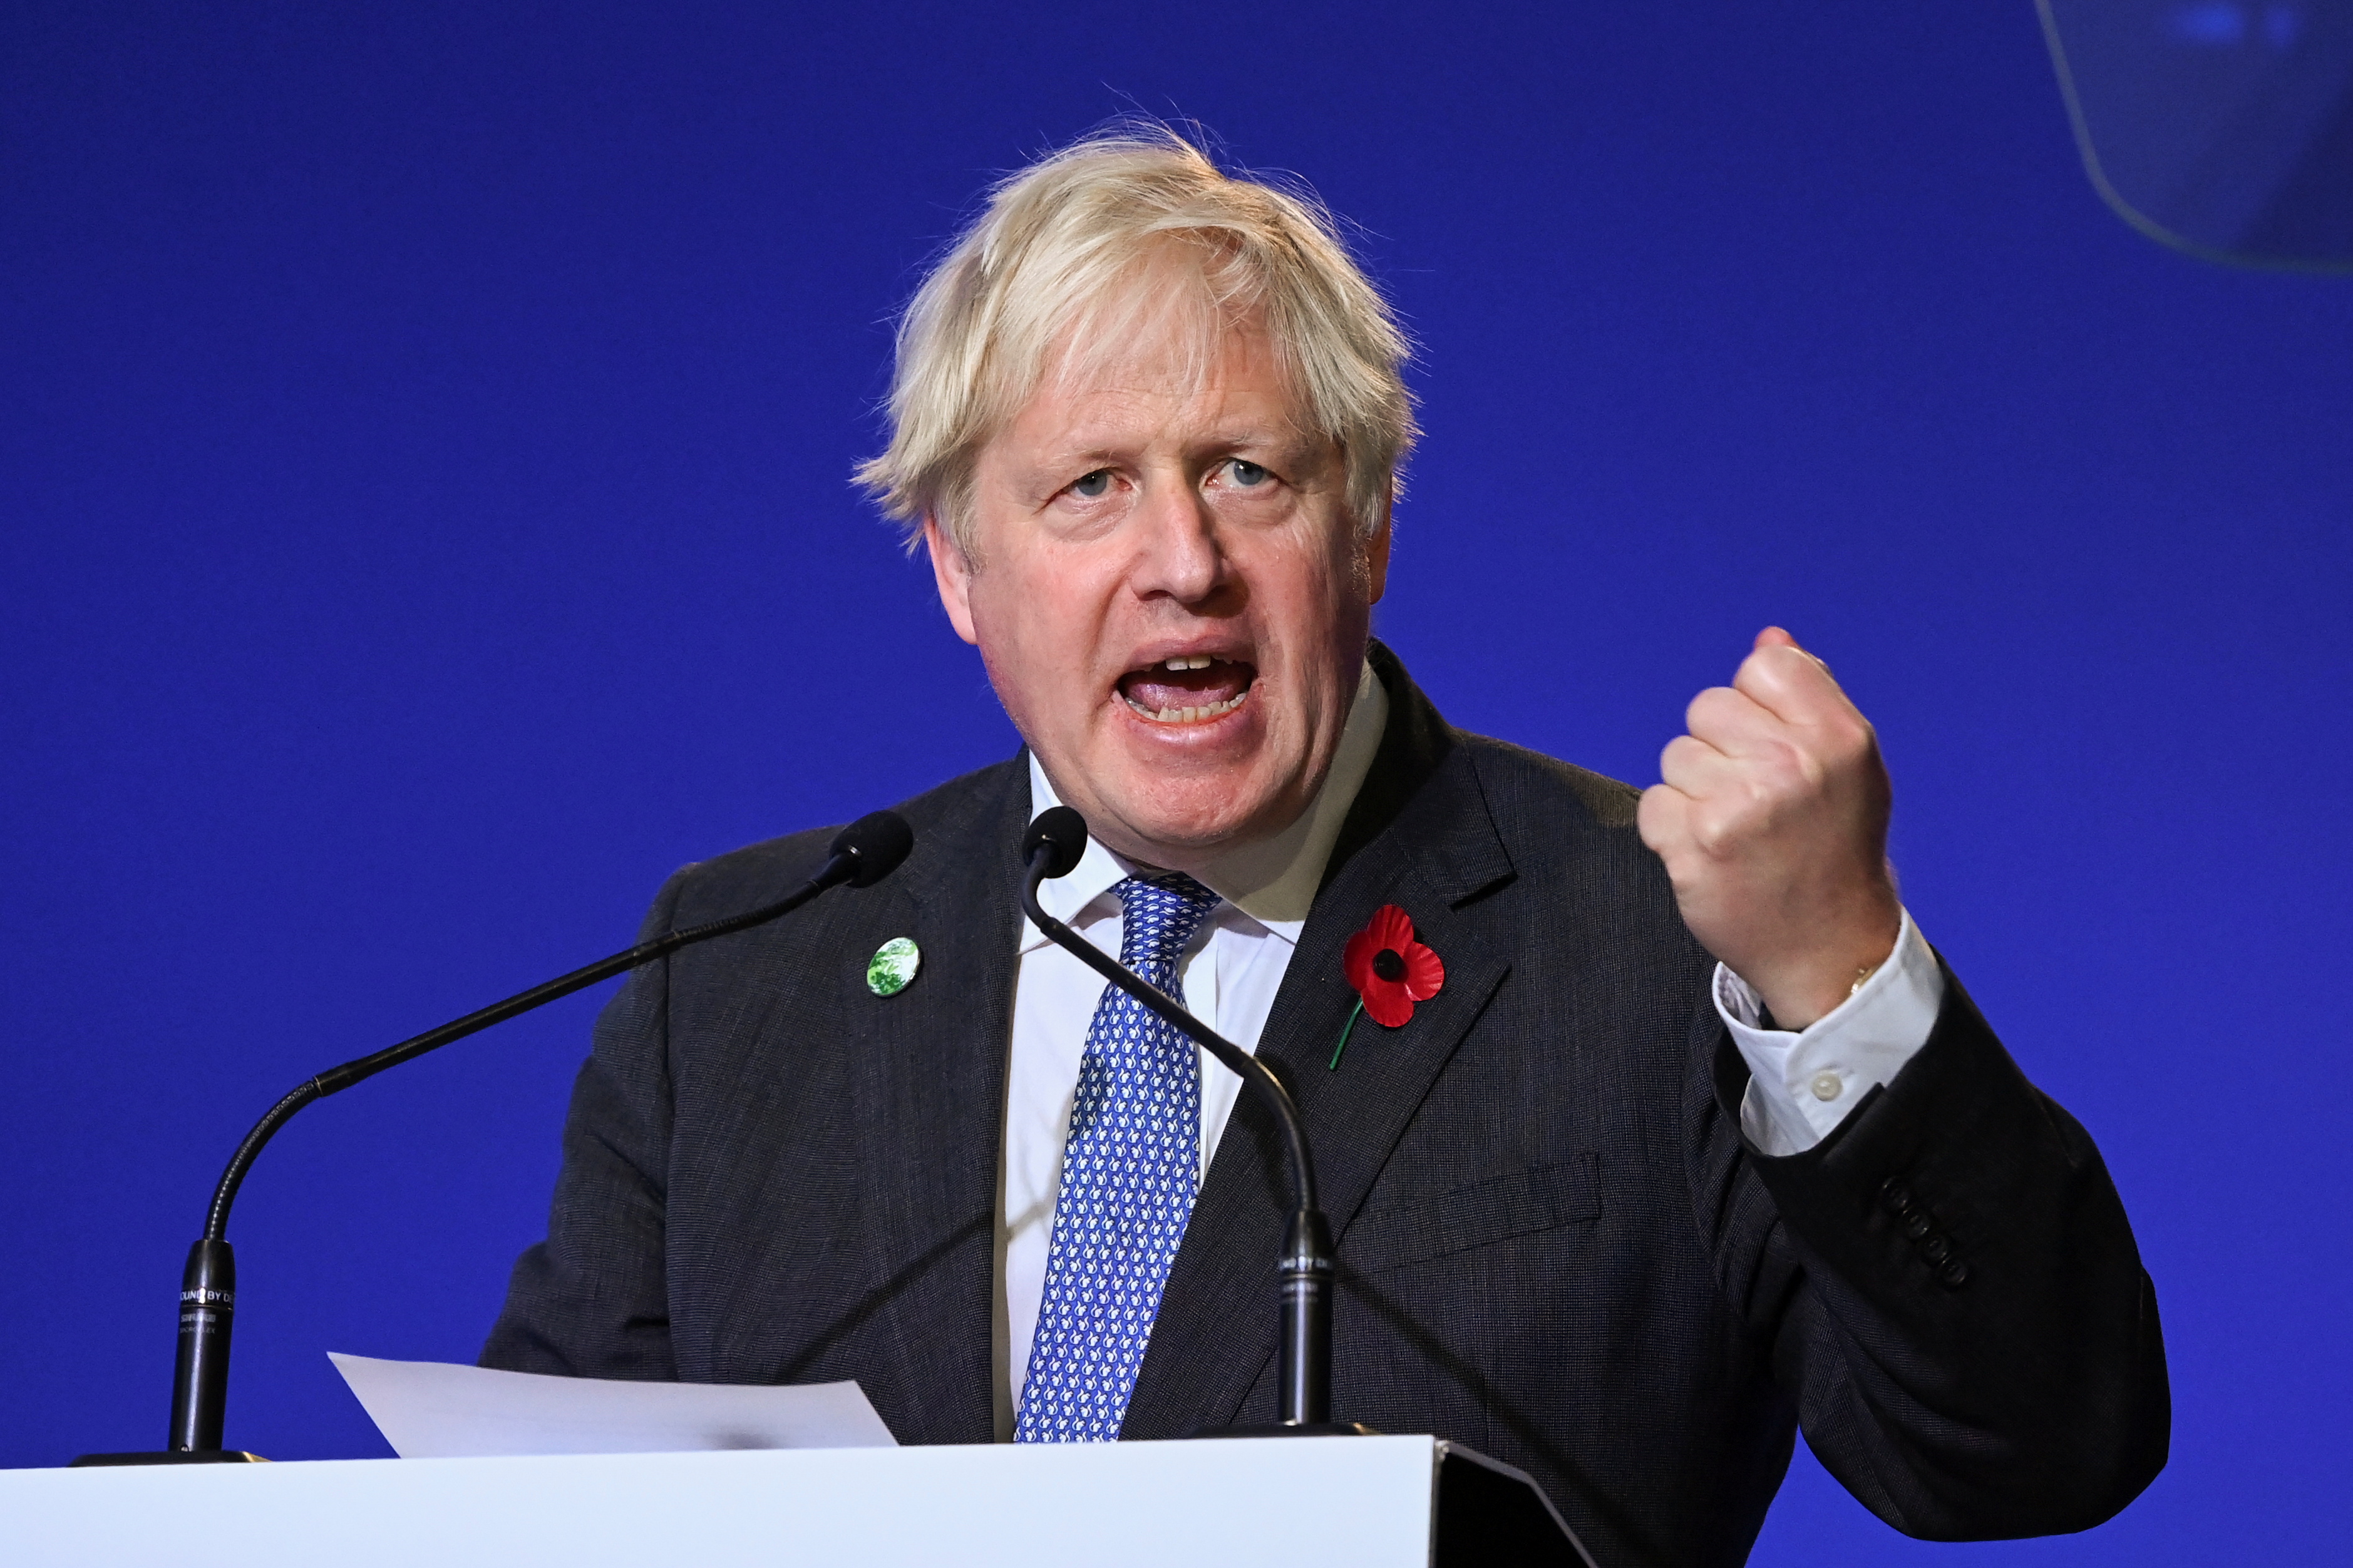 Britain's Prime Minister Boris Johnson speaks during the opening ceremony of the UN Climate Change Conference (COP26) in Glasgow, Scotland, Britain November 1, 2021. Jeff J Mitchell/Pool via REUTERS